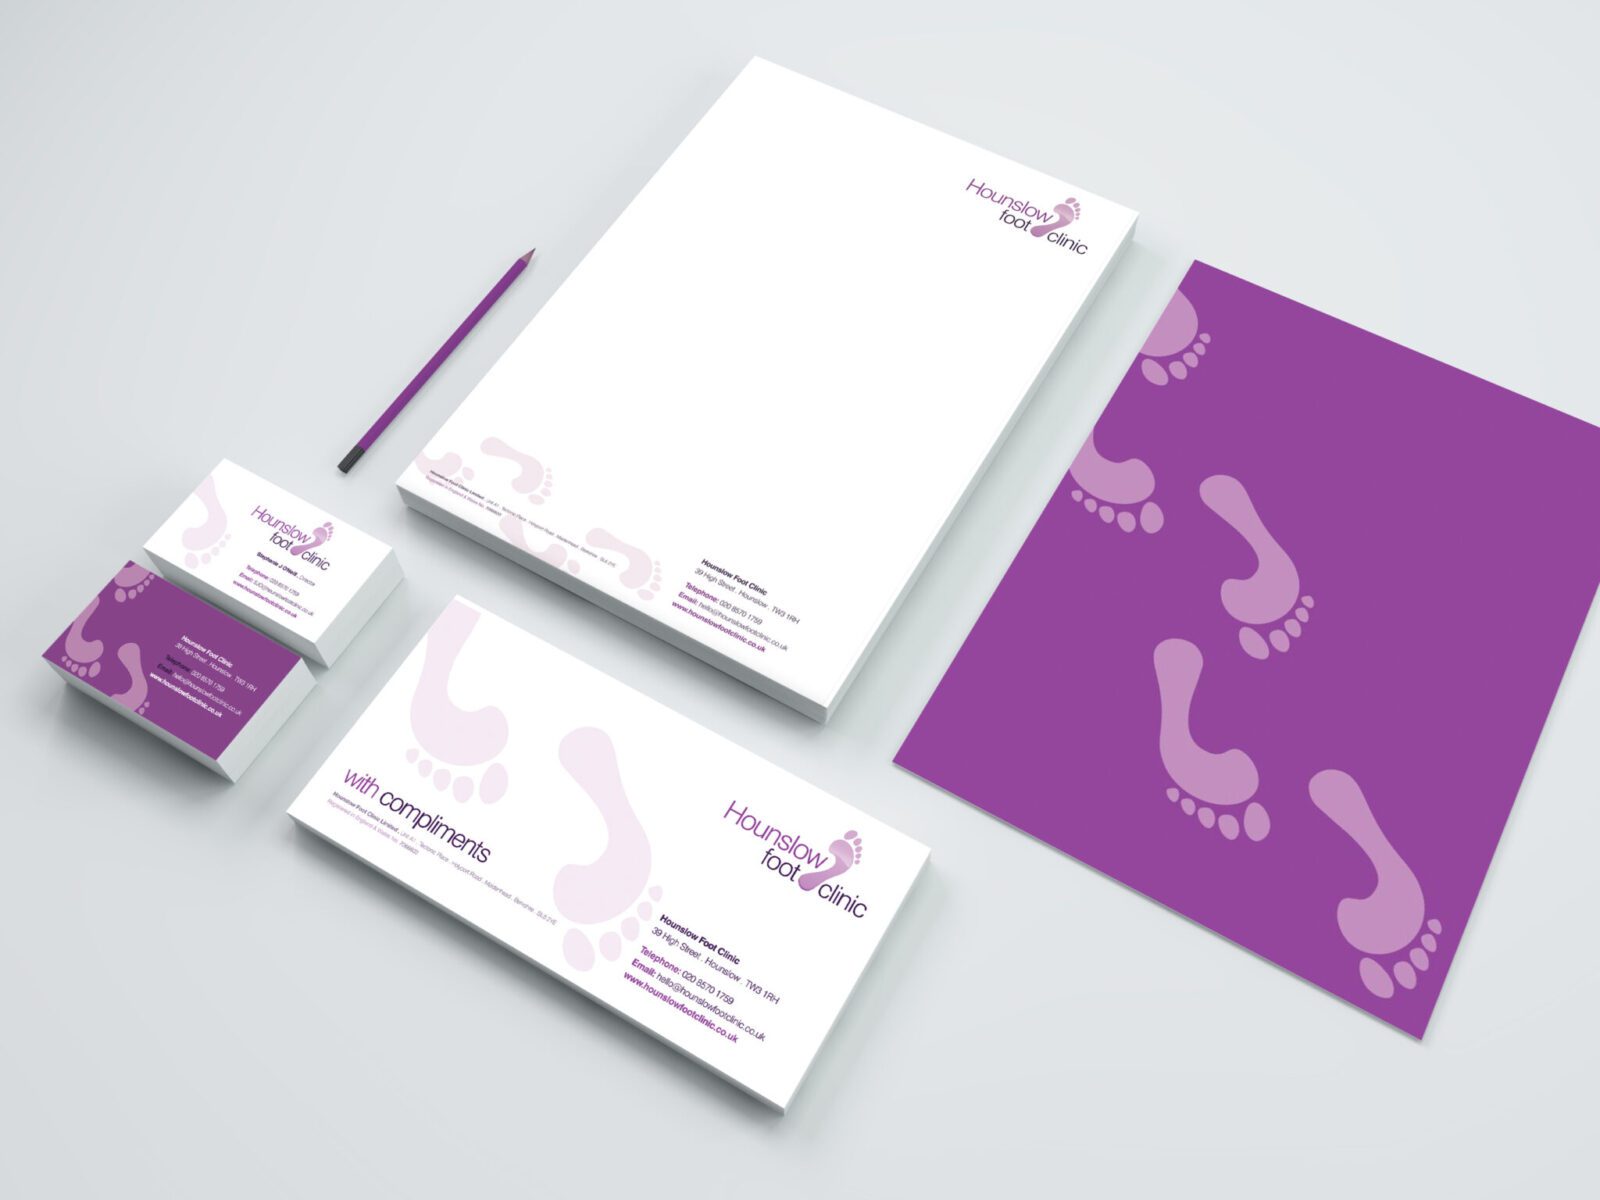 Mock-up of Hounslow Foot Clinic's brand and stationery design.